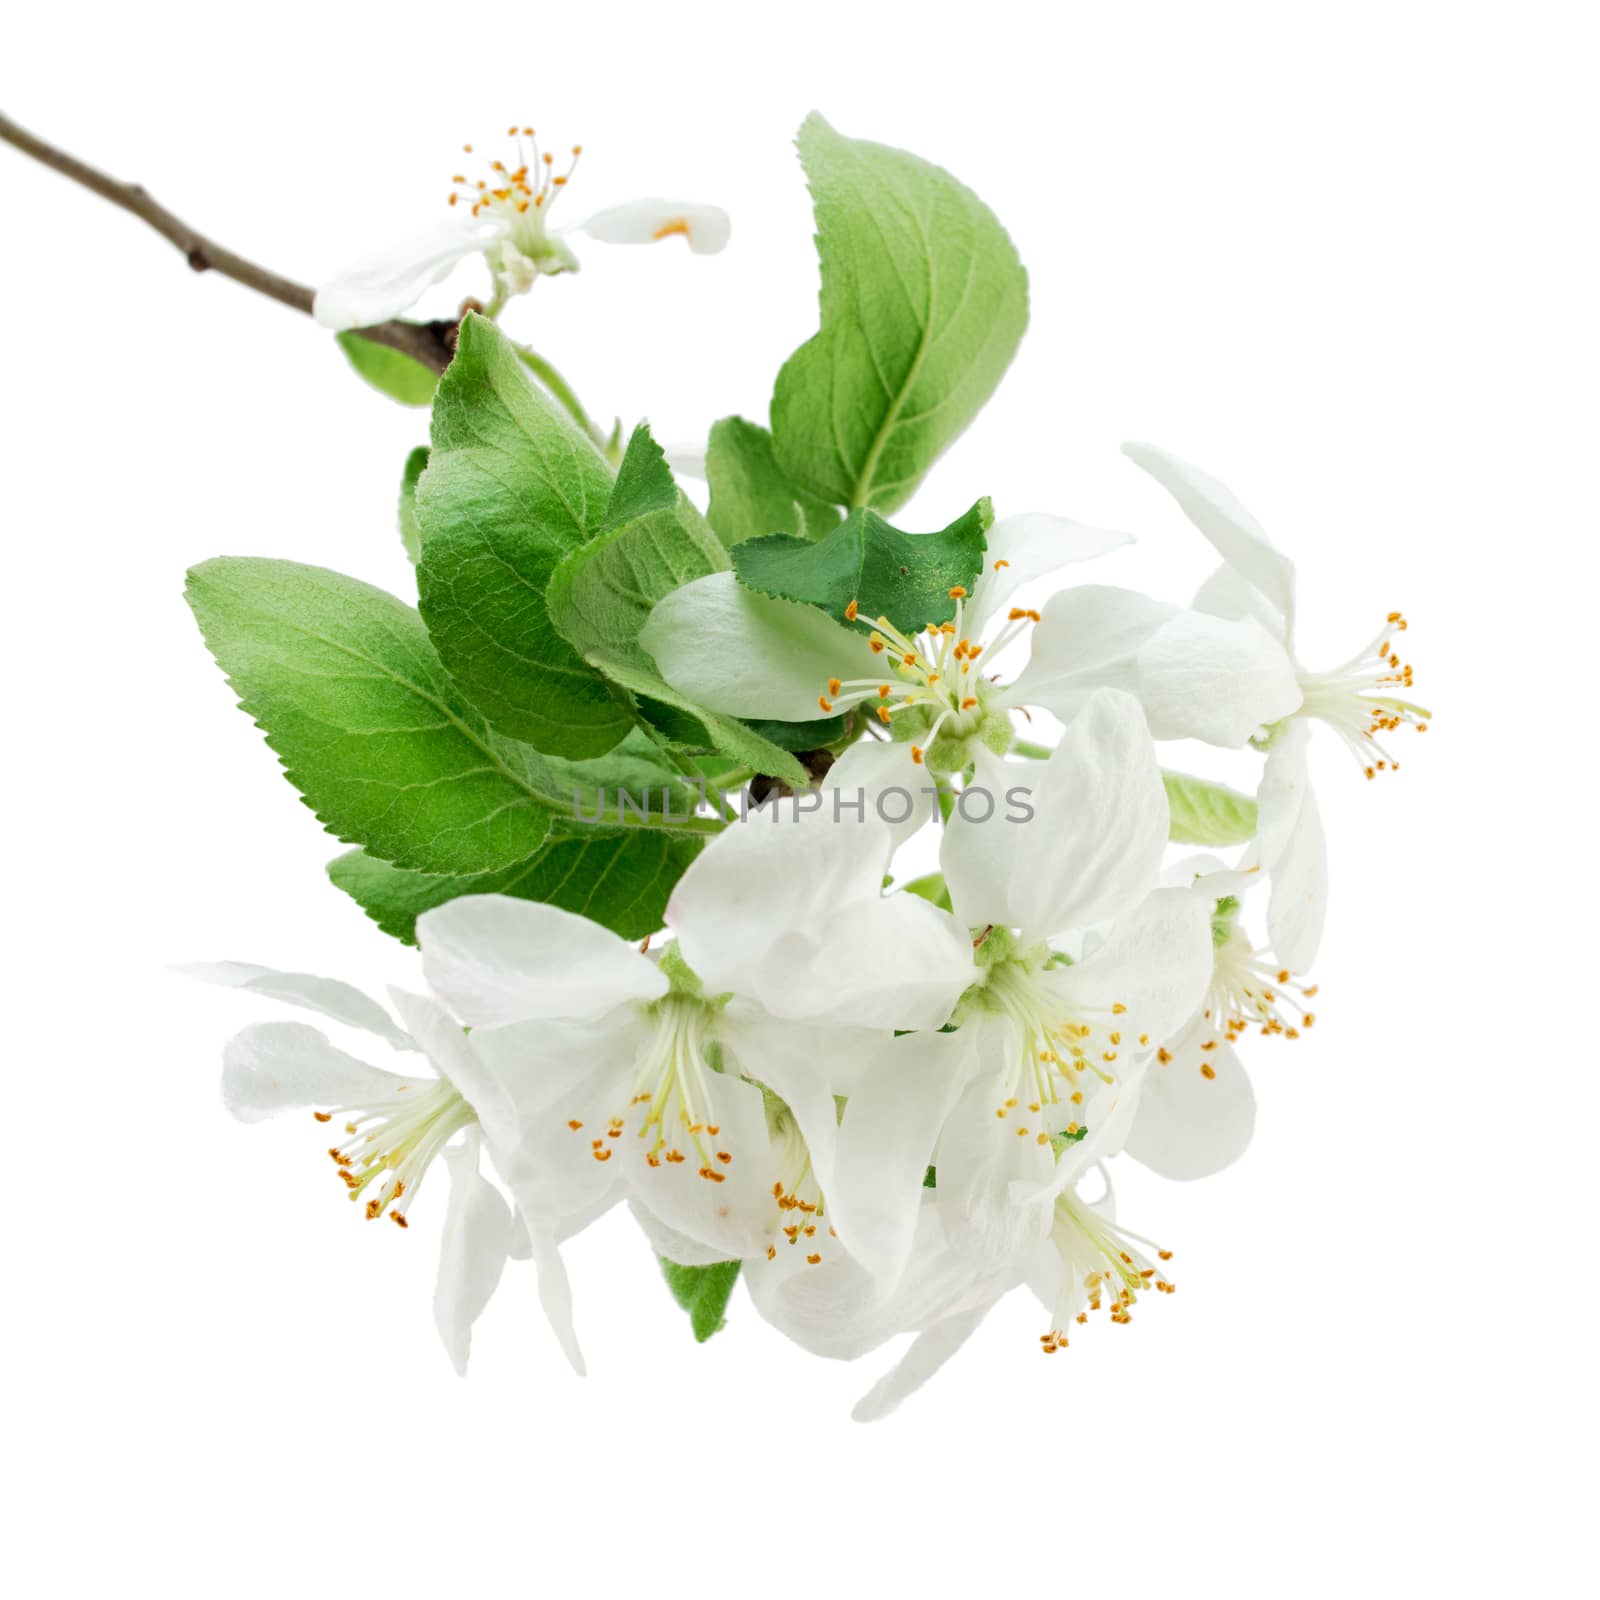 Apple blossoms isolated on a white background